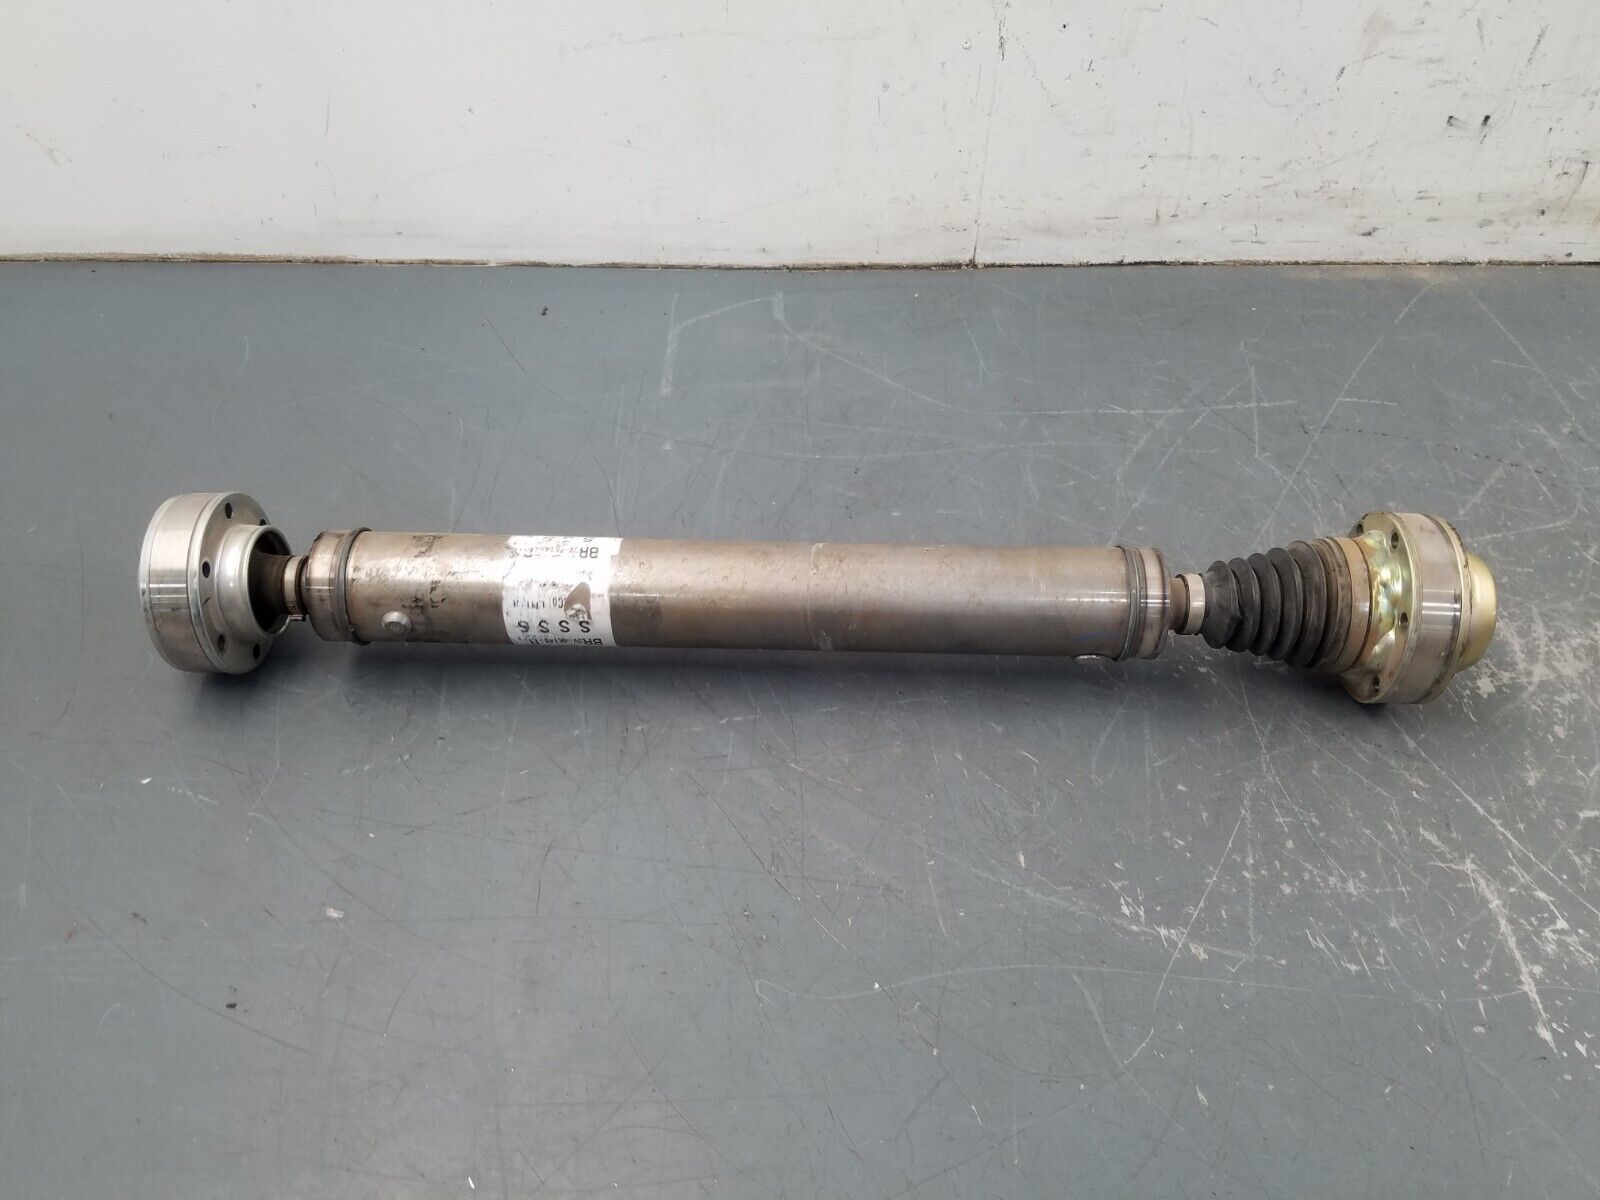 2011 Ford Mustang Shelby GT500 Driveshaft - Rear Section #0887 Q6